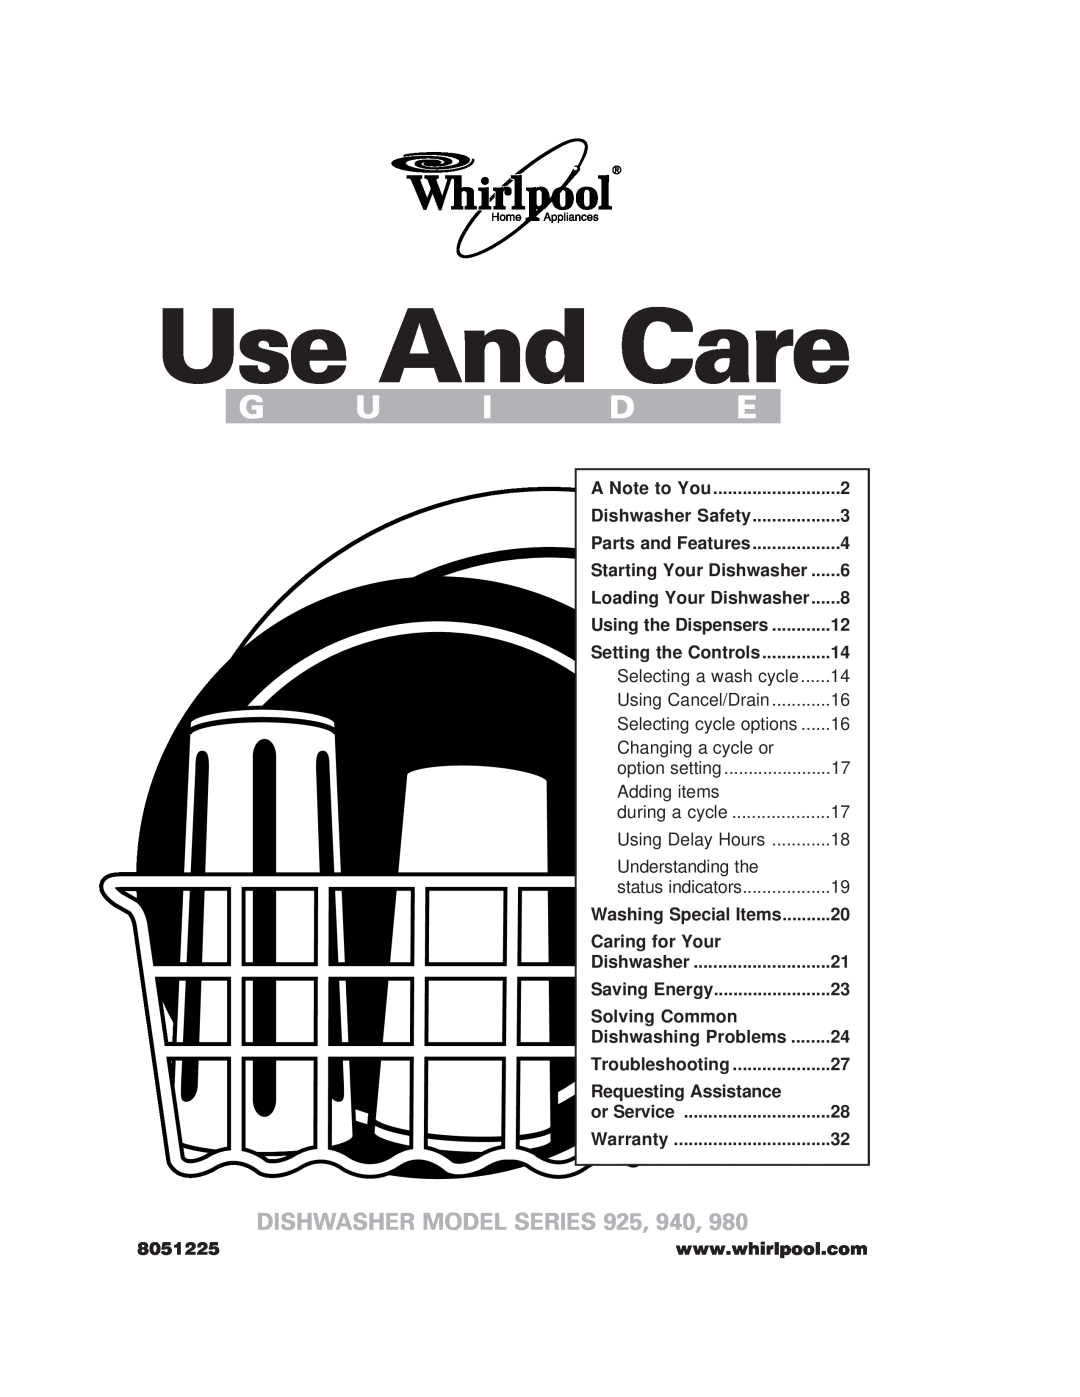 Whirlpool 980 warranty Use And Care, Dishwasher Model Series 